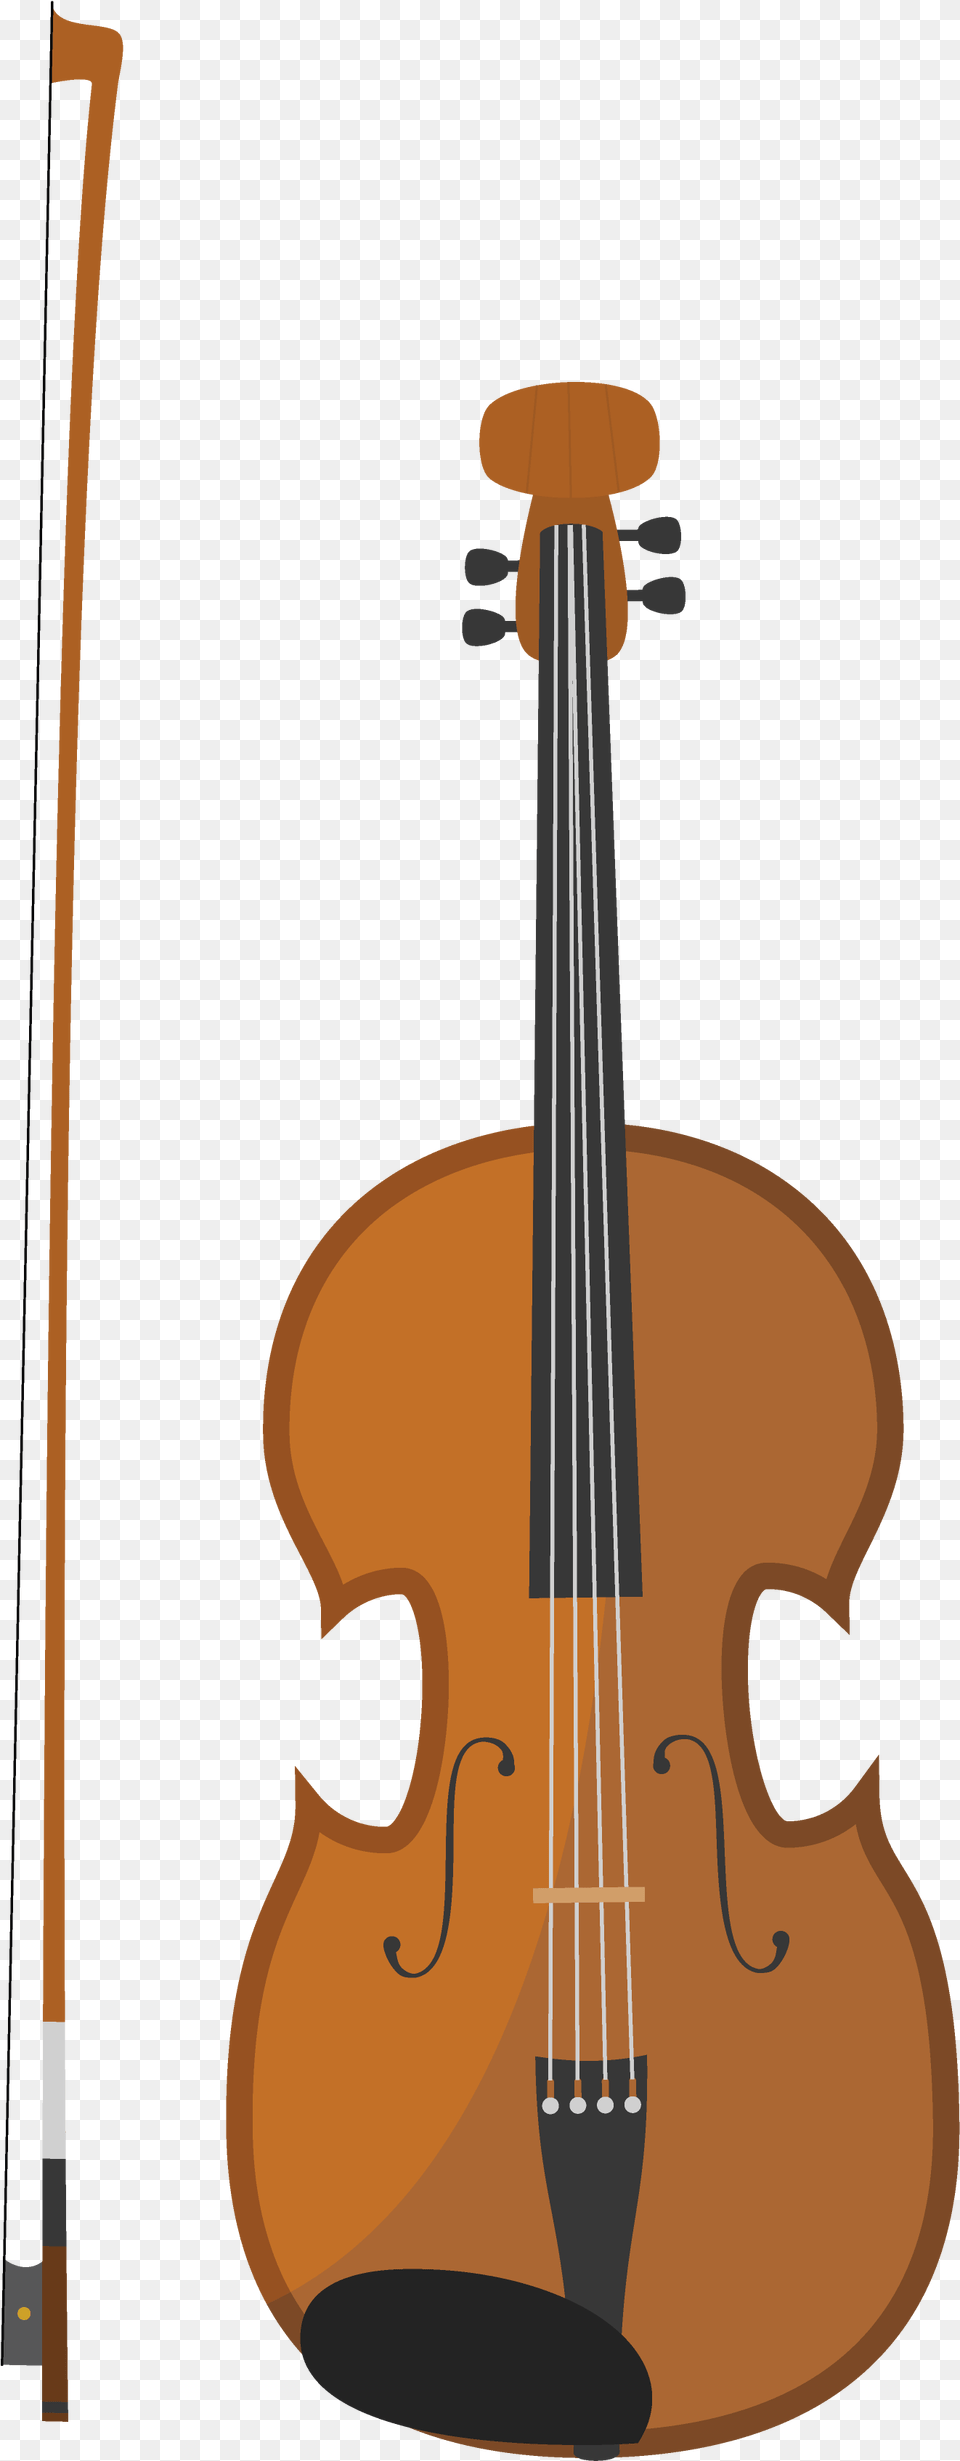 Https Proinhome, Musical Instrument, Violin Free Png